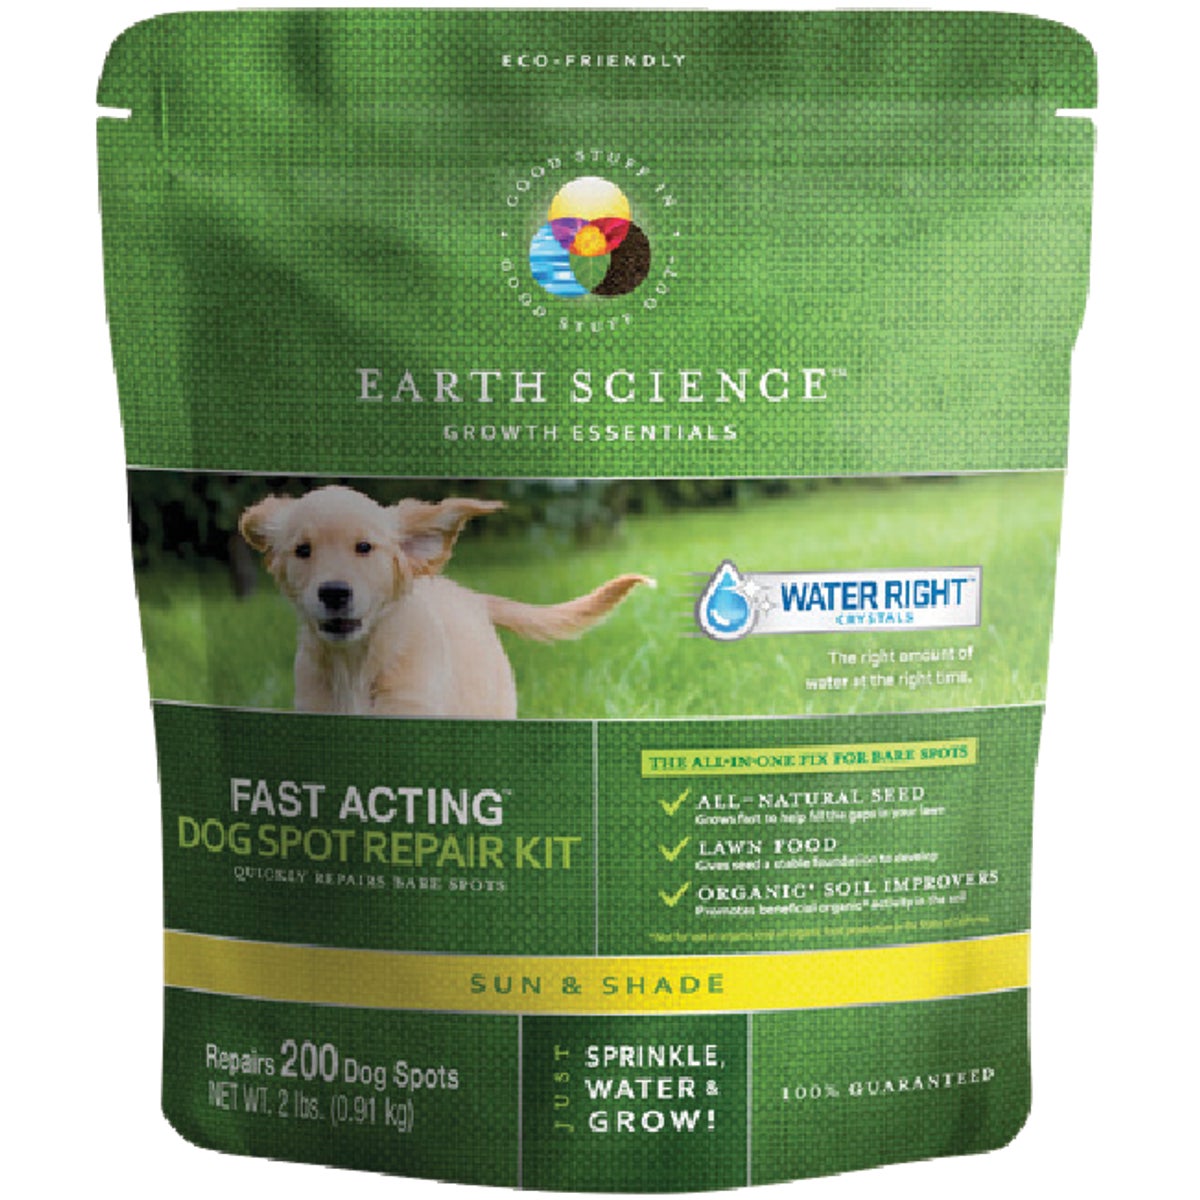 Earth Science 2Lb. Covers Up to 300 Dog Spots Sun & Shade Grass Patch & Repair